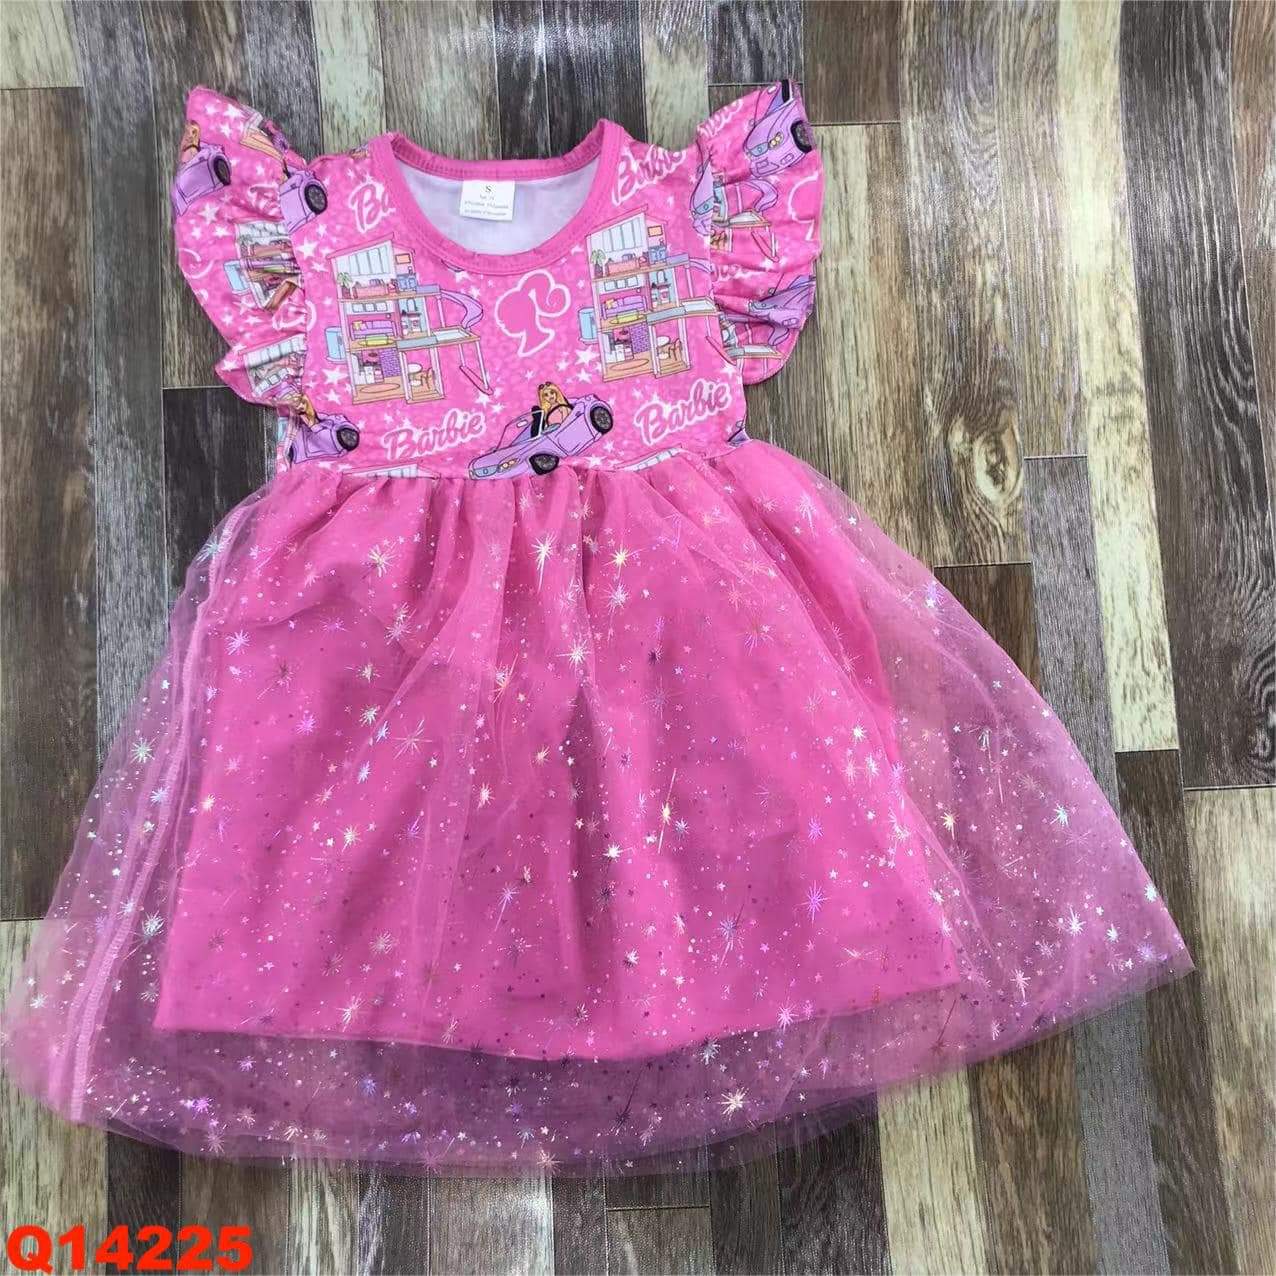 Barbie Tulle Youth Dress ♡ Ships in Approx 3-4 weeks {Custom Made}